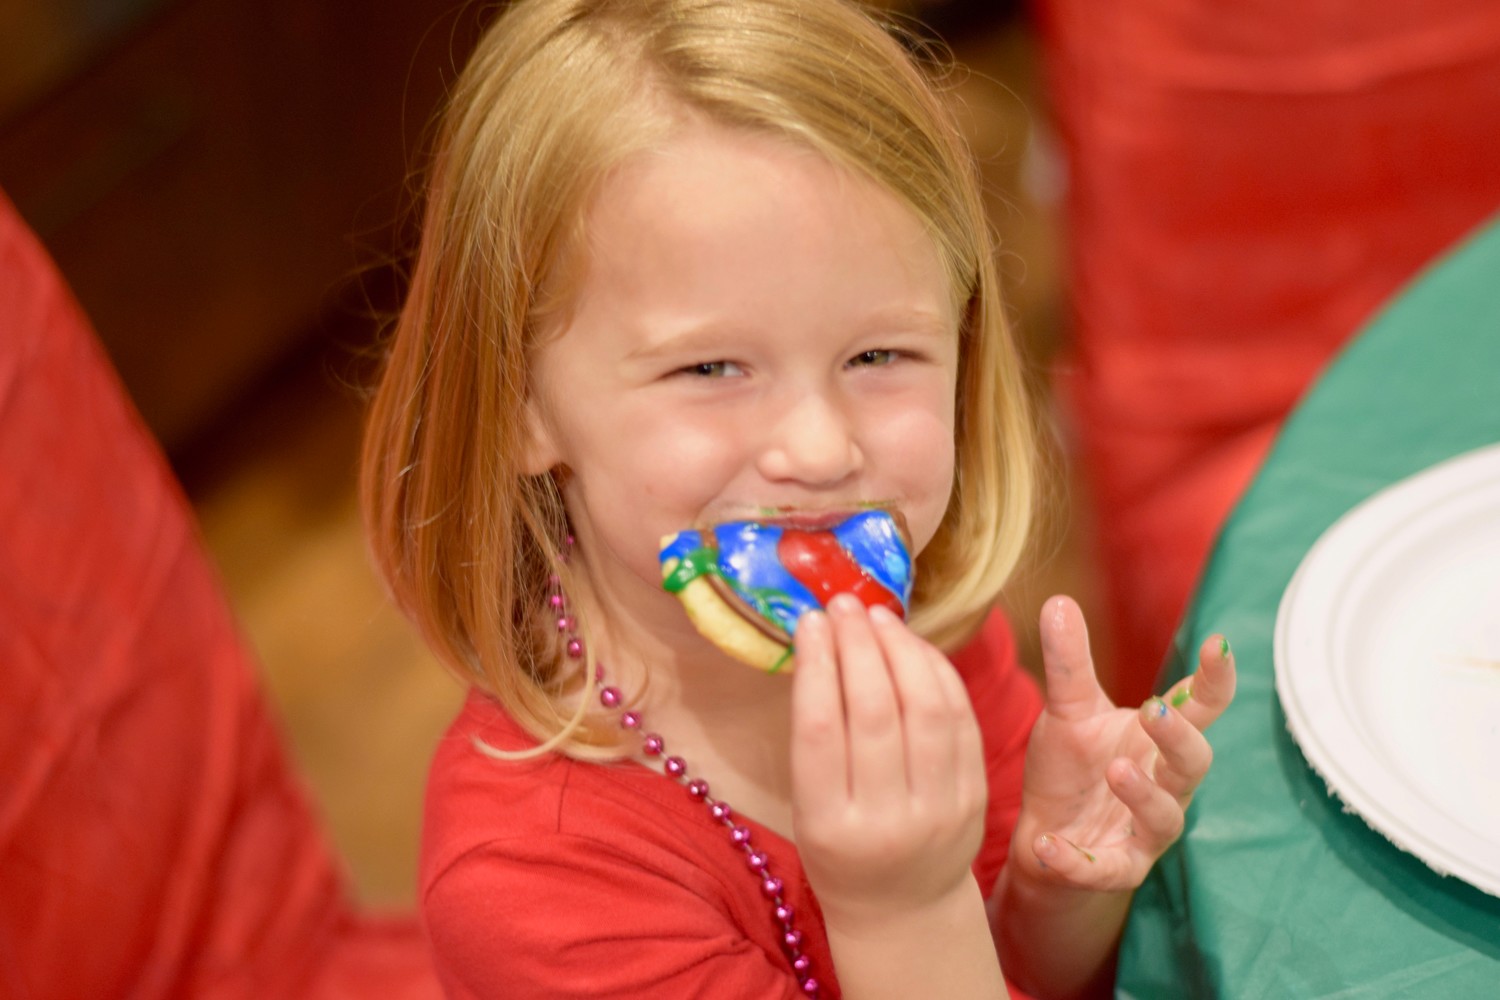 Children celebrate the holidays by decorating cookies at Shearwater’s Winter Festival.